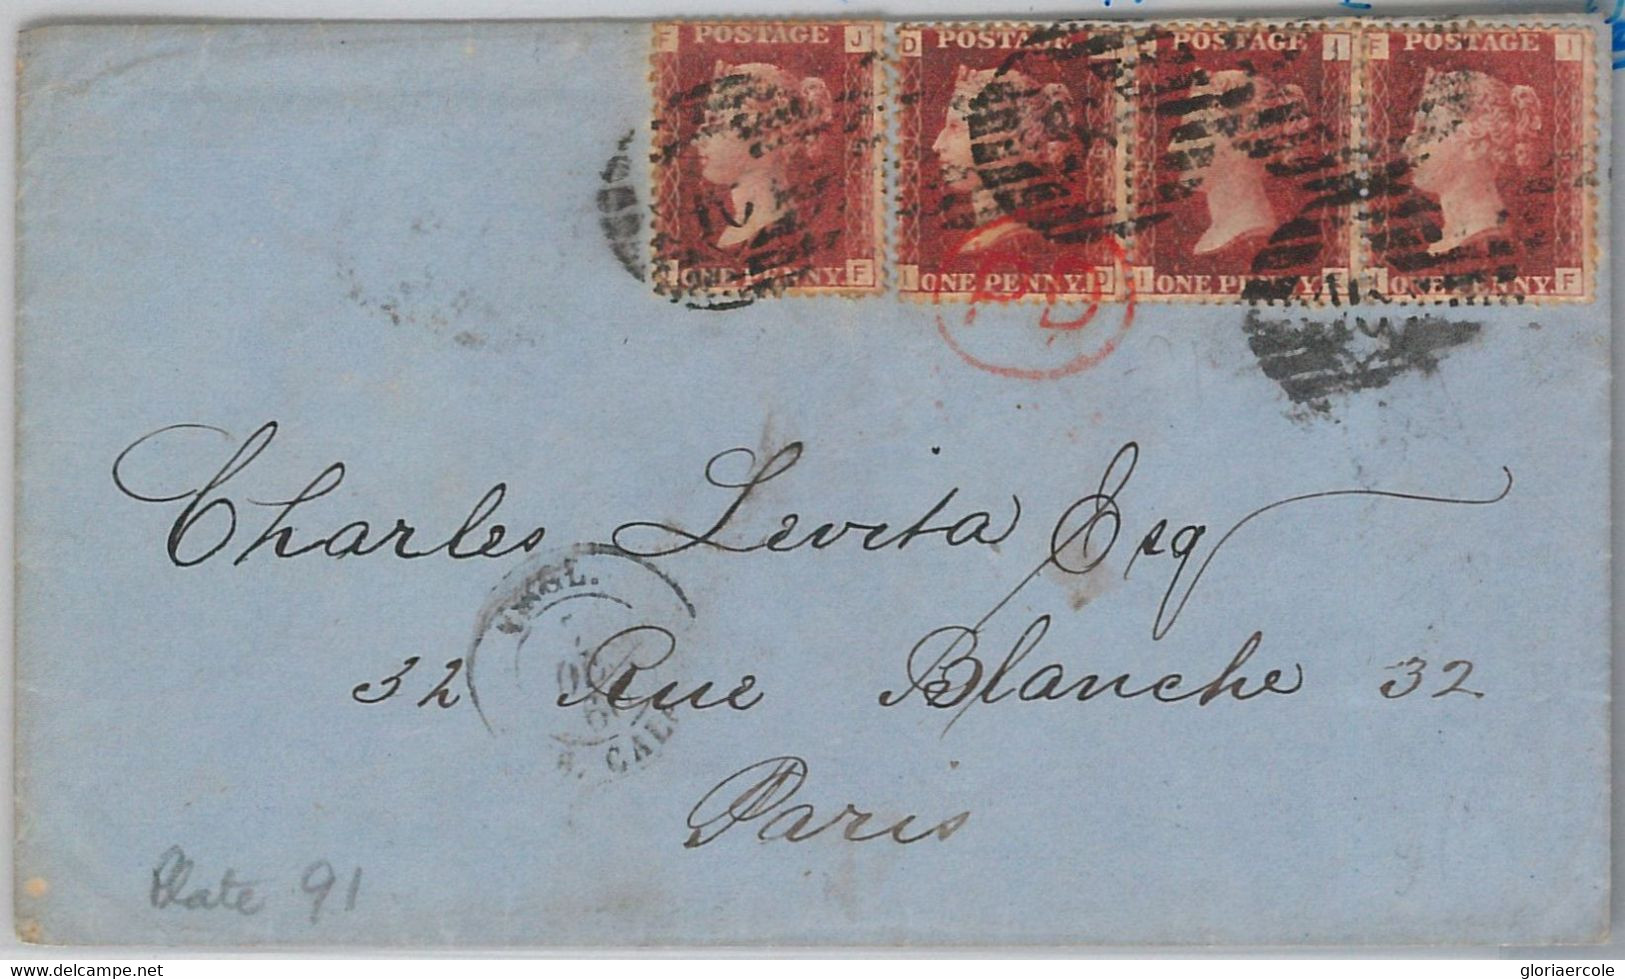 50705 - GB -  POSTAL HISTORY -  COVER To PARIS  Red Penny  1866 -- NICE! - Covers & Documents